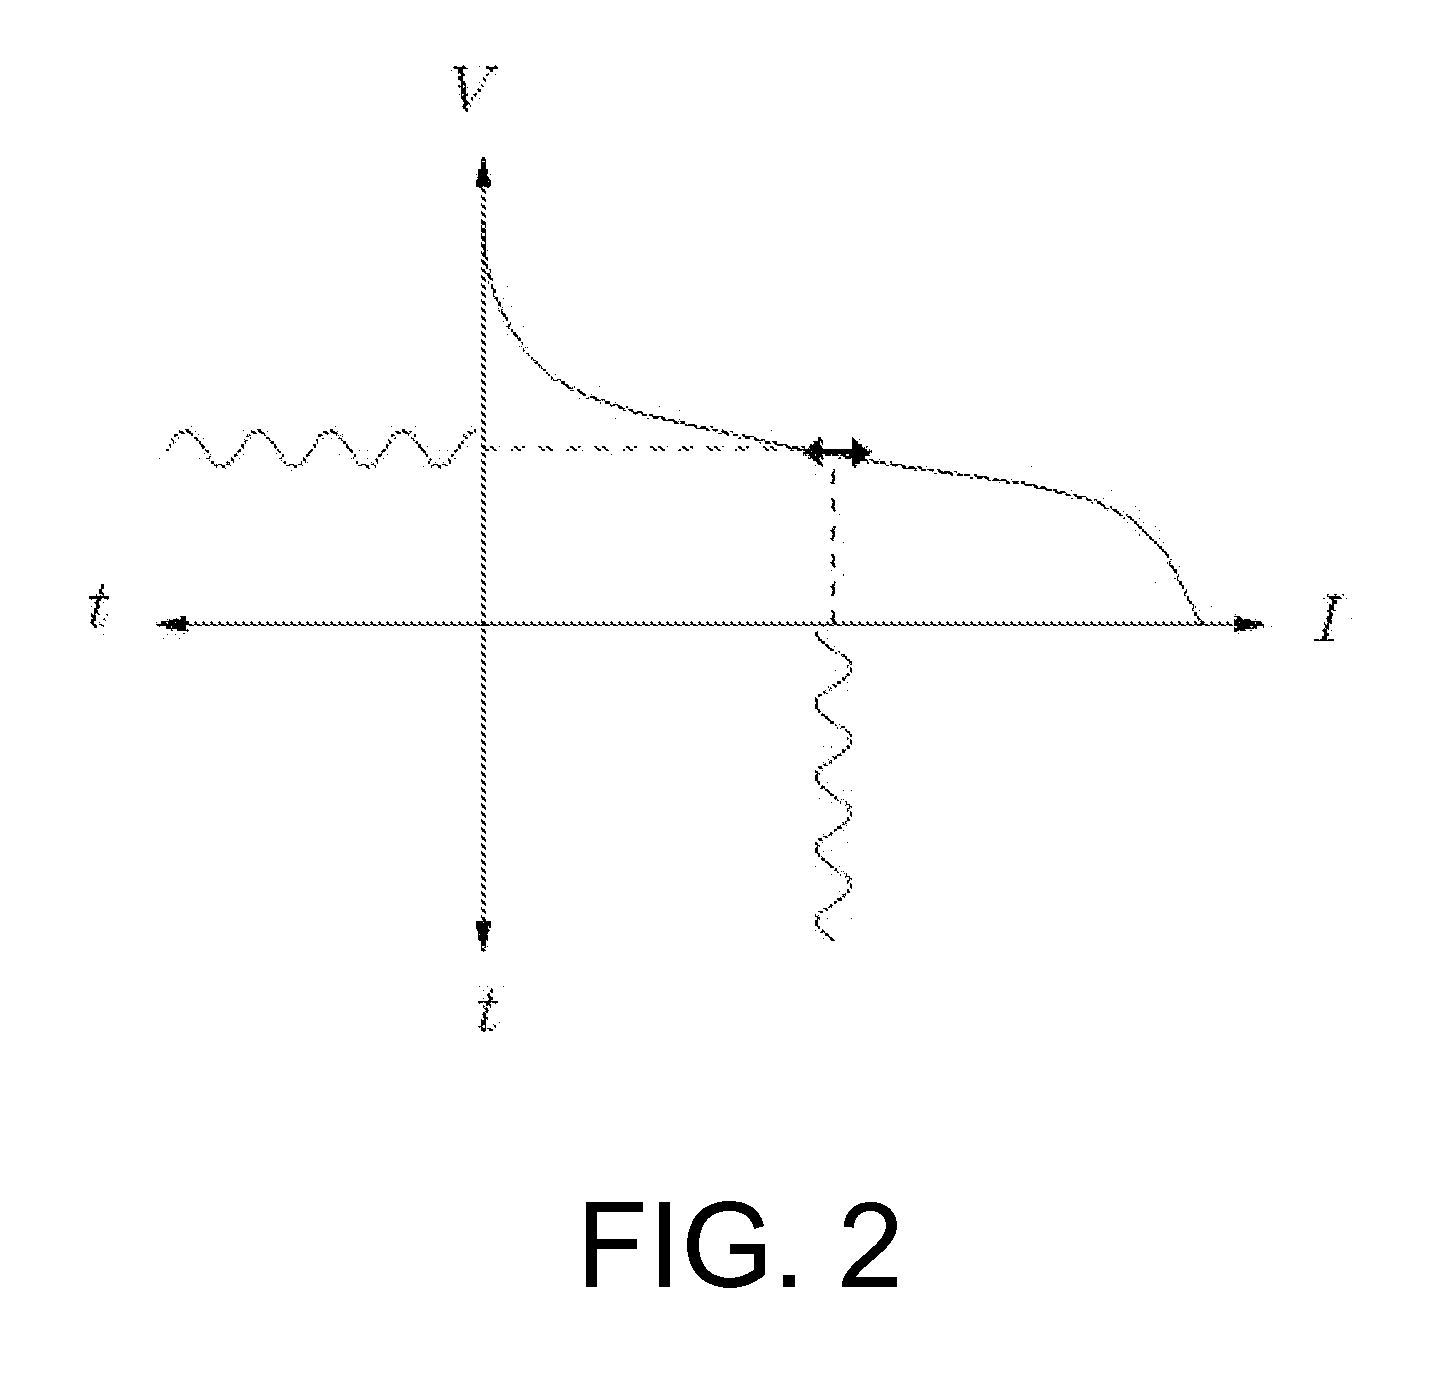 Method for characterizing an electrical system by impedance spectroscopy